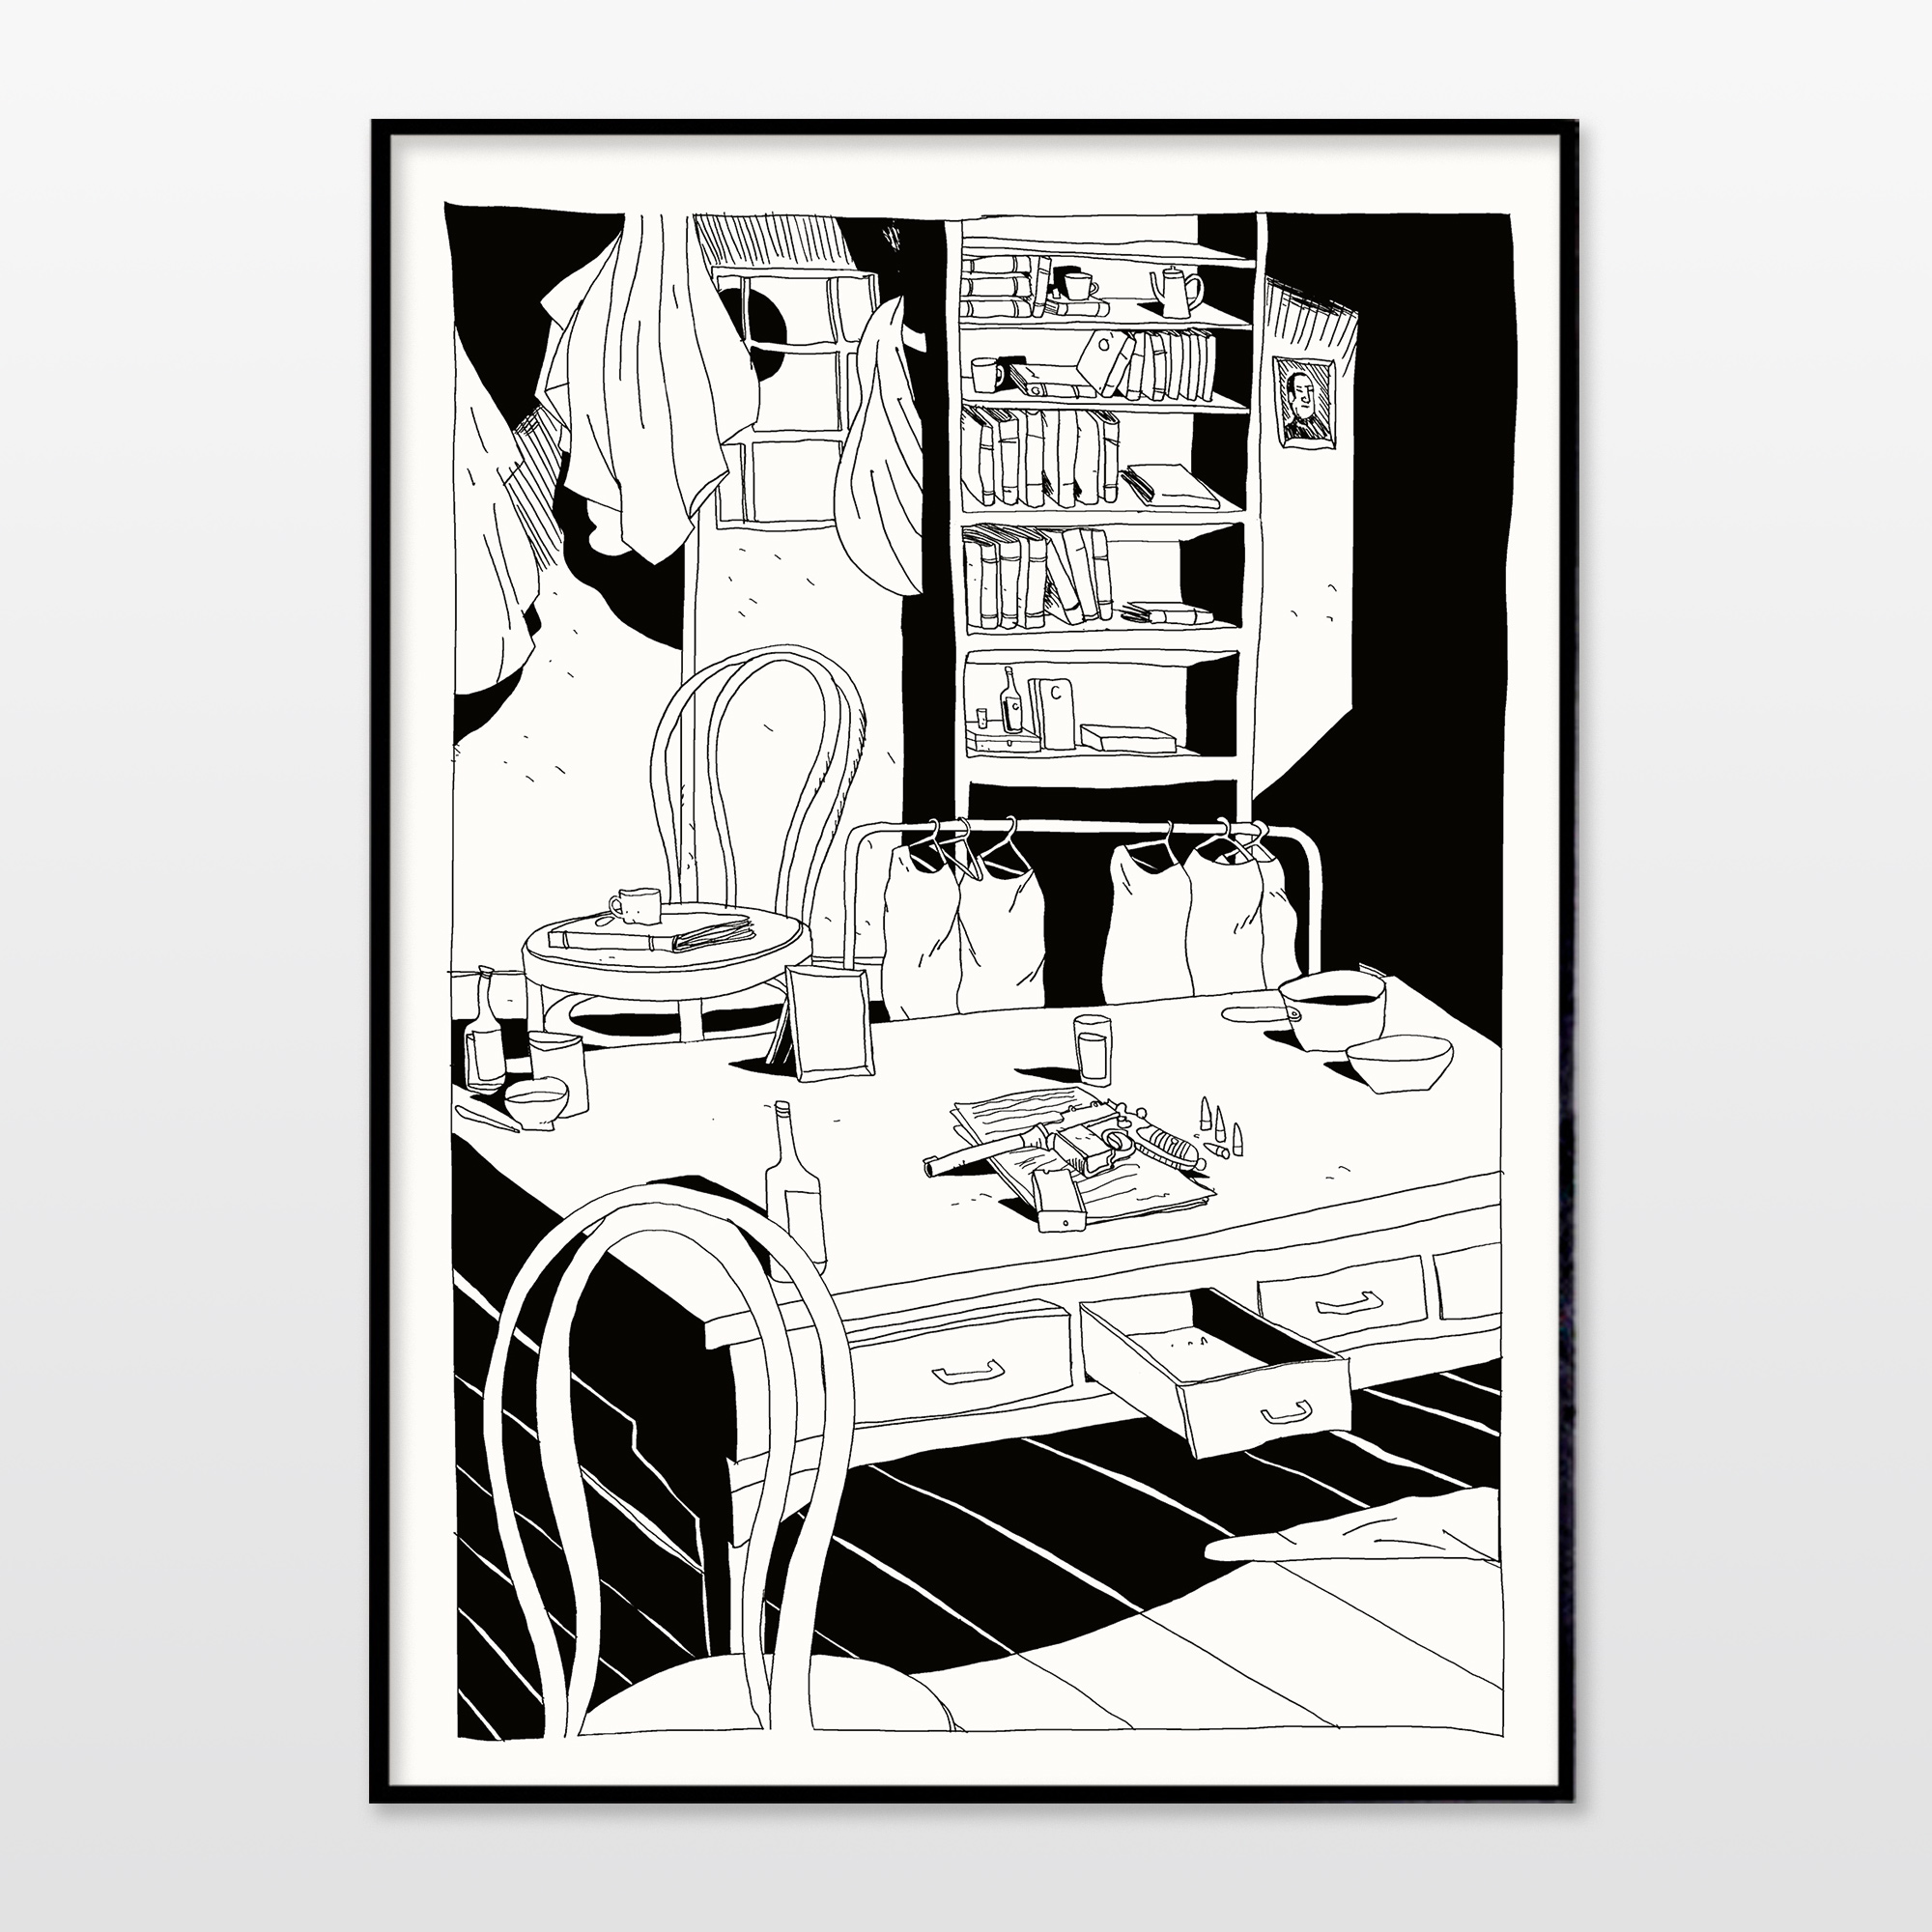 posters-prints, giclee-print, figurative, graphical, illustrative, monochrome, cartoons, everyday life, black, white, ink, paper, black-and-white, contemporary-art, danish, decorative, design, modern, modern-art, nordic, posters, prints, scandinavien, sea, time, trees, Buy original high quality art. Paintings, drawings, limited edition prints & posters by talented artists.